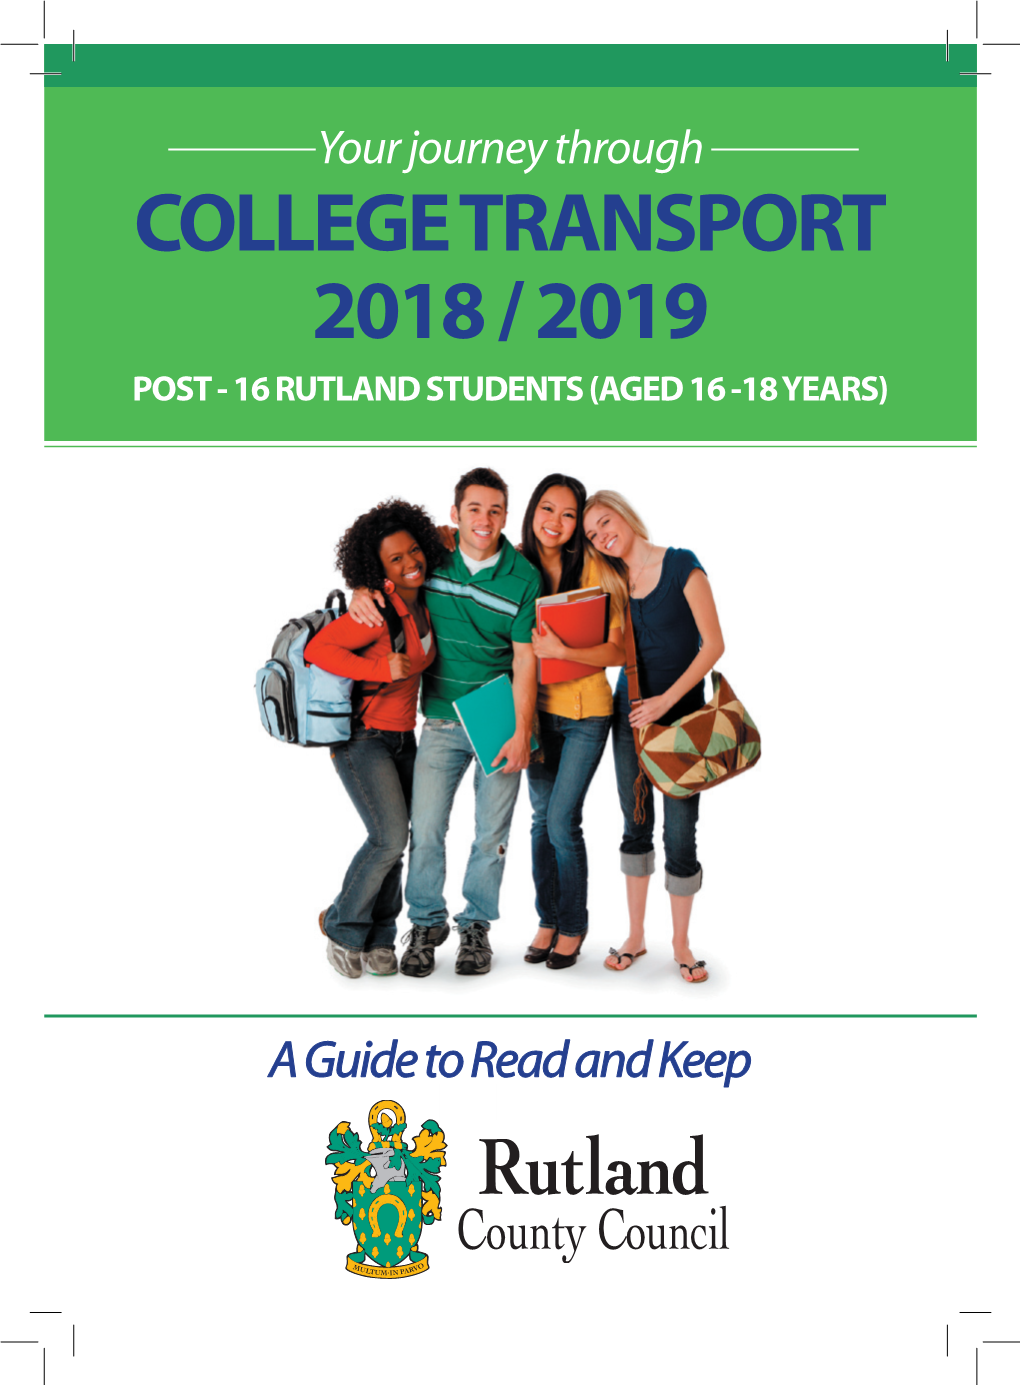 College Transport 2018 2019 A5 Guide.Indd